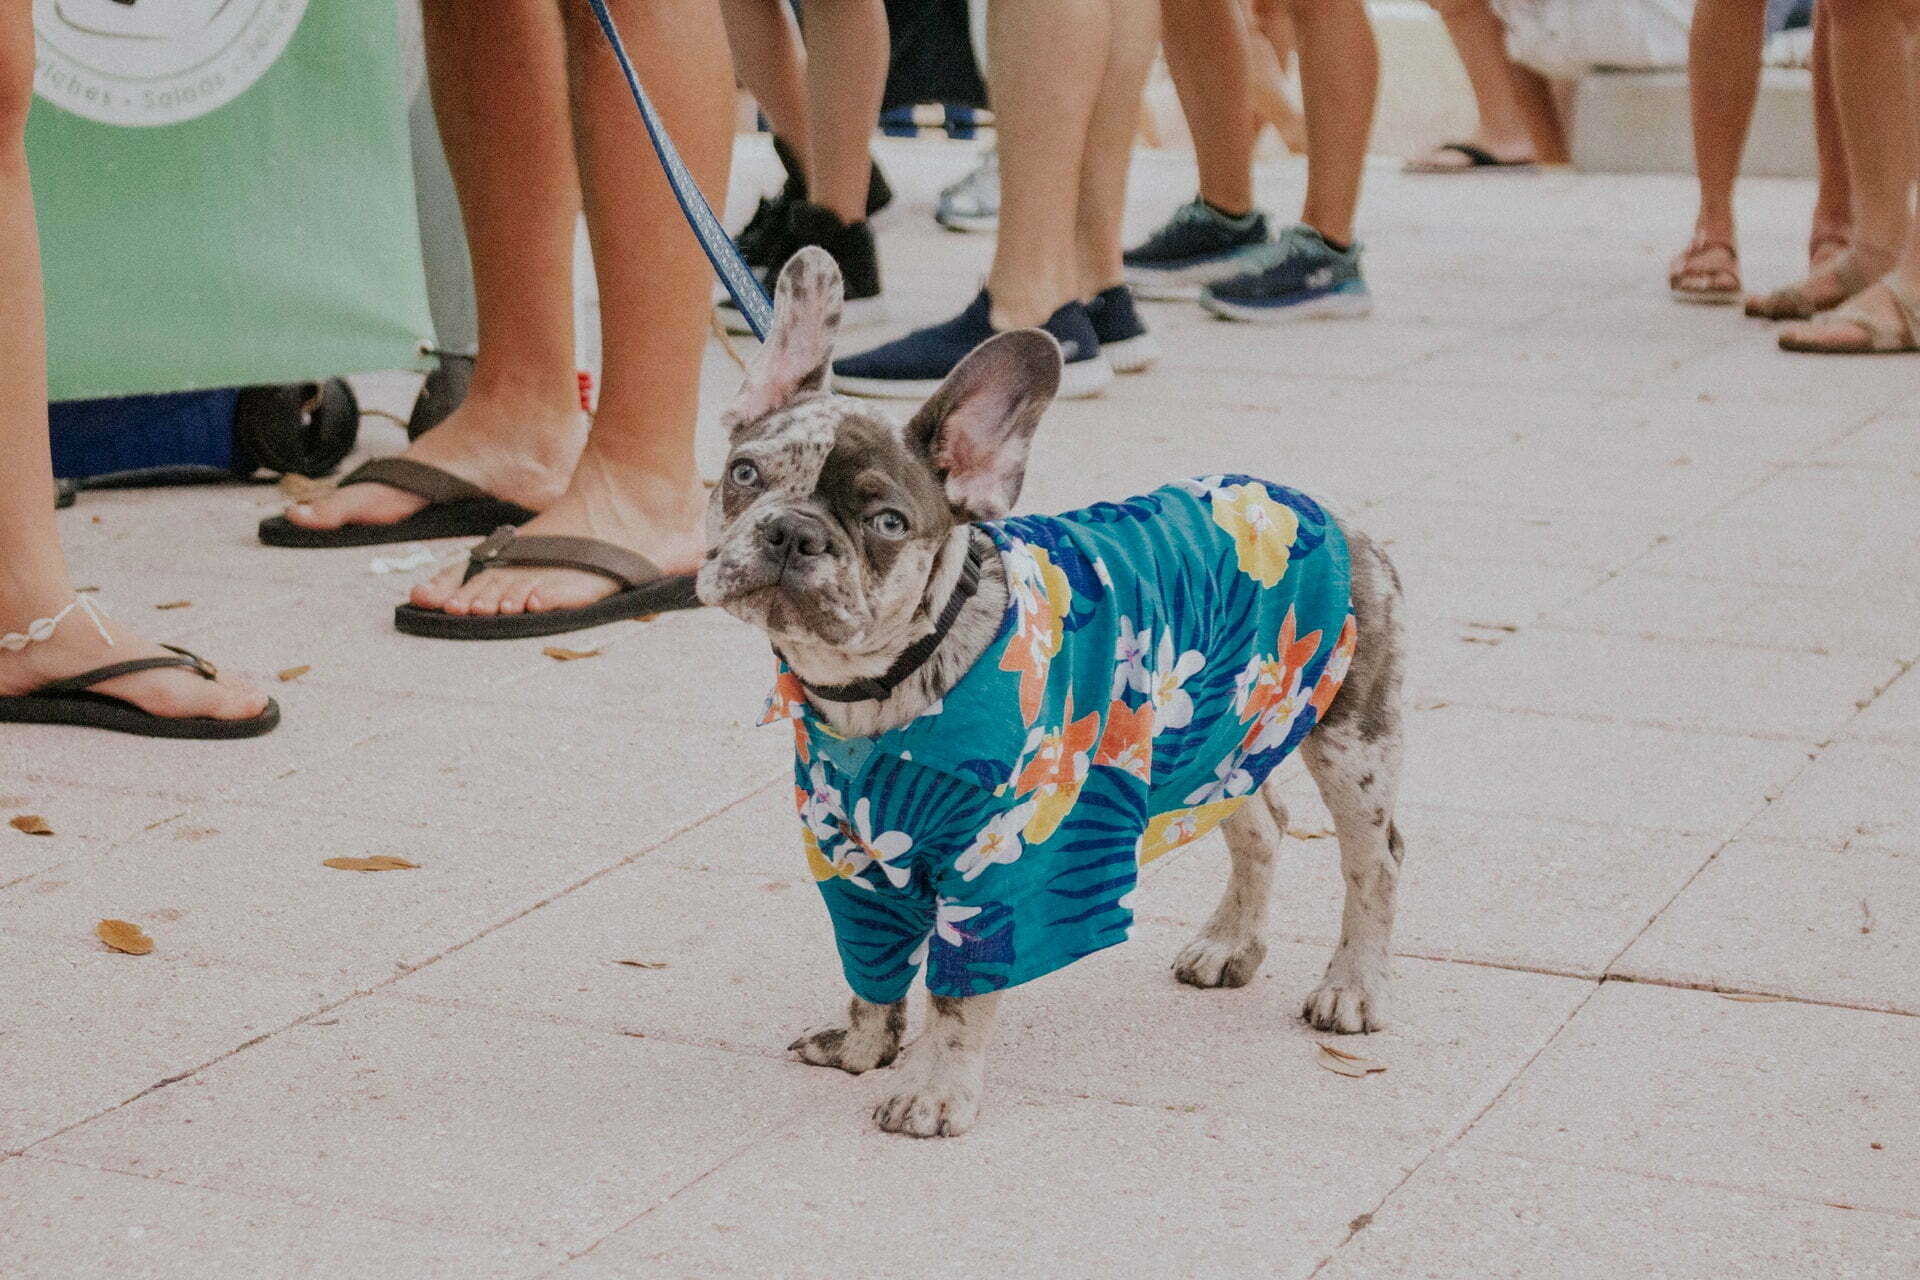 a dog wearing a blue and white shirt and standing on a sidewalk